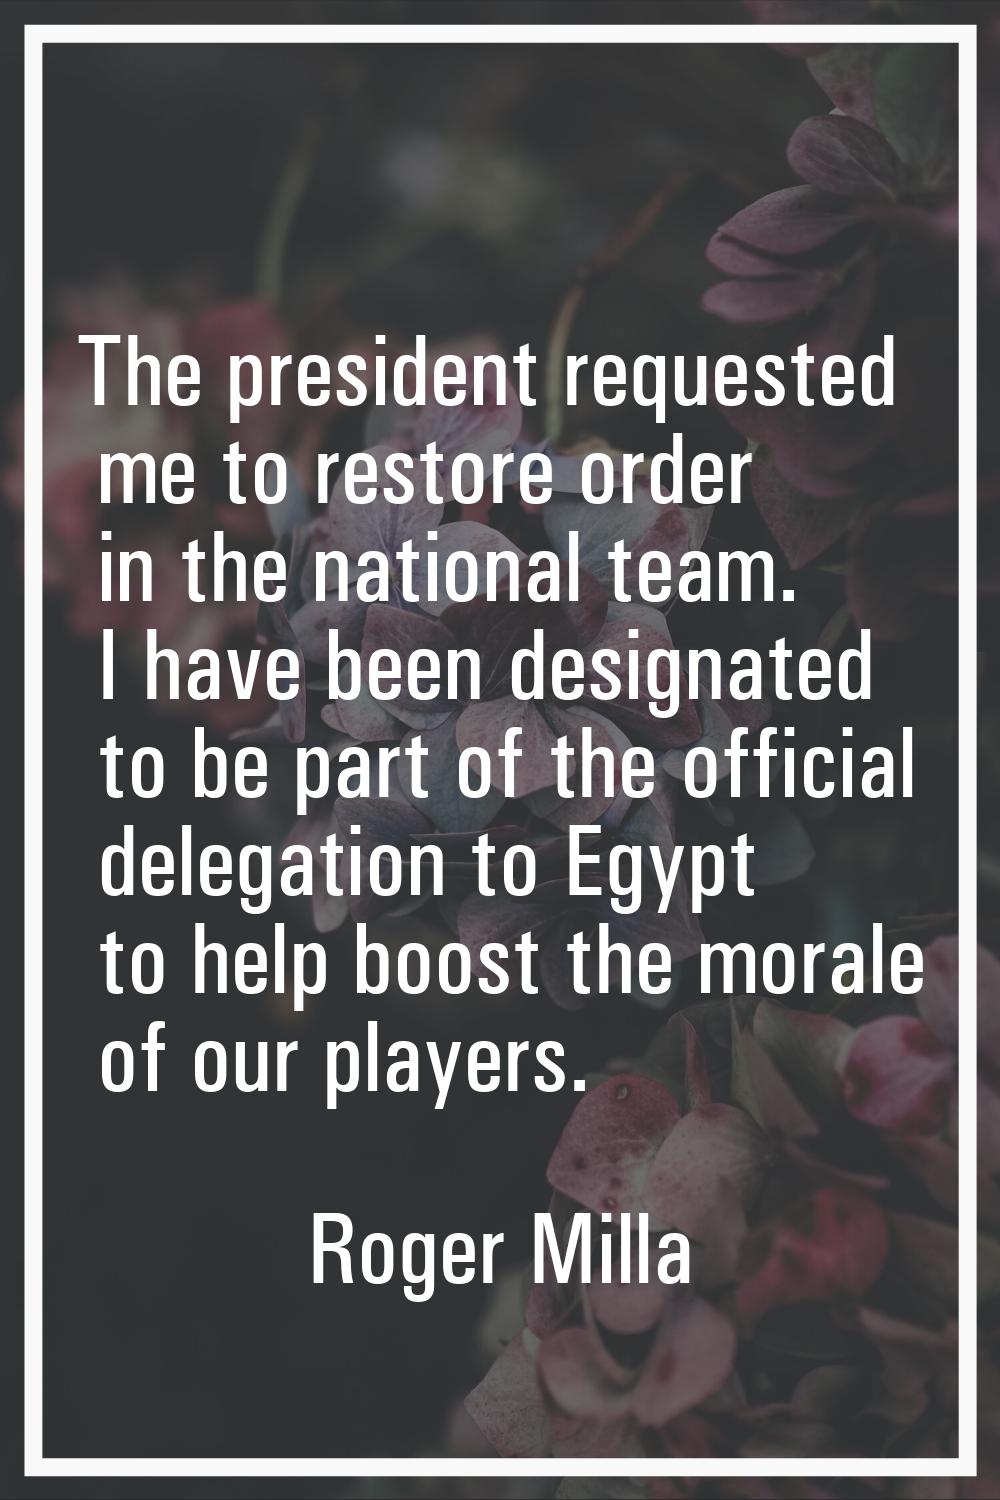 The president requested me to restore order in the national team. I have been designated to be part